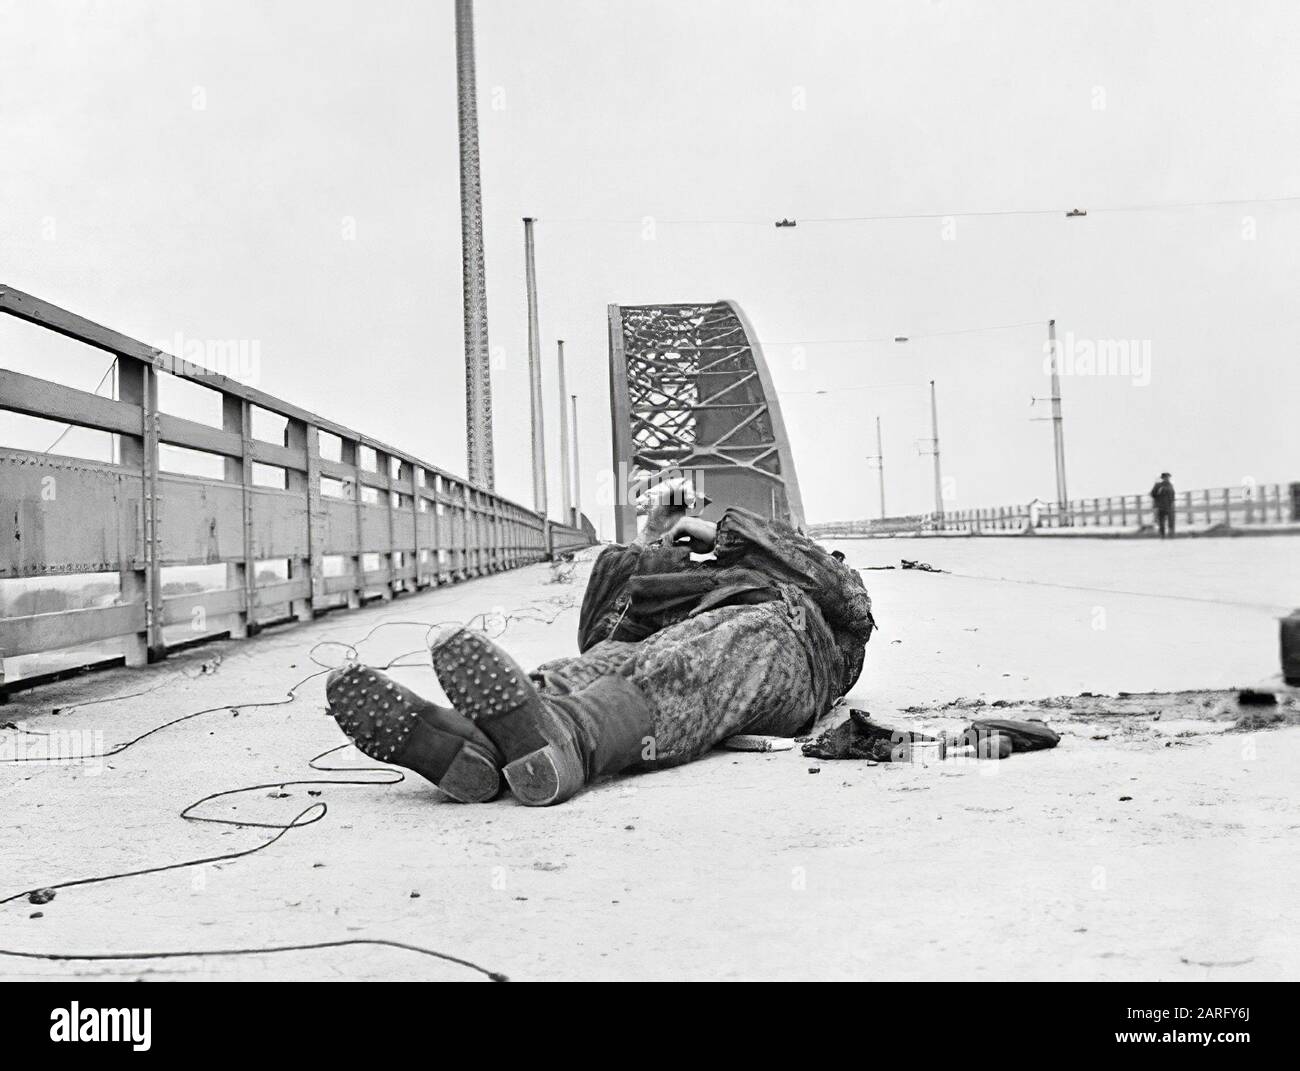 Operation Market Garden, Arnhem, the Netherlands, 1944: The bridge at Nijmegen after it had been captured by the 82nd (US) Airborne Division. A dead German SS lies where he fell during the attack. Note the heavy boots and the full camouflage outfit. In the right background, a lone GI patrols Stock Photo